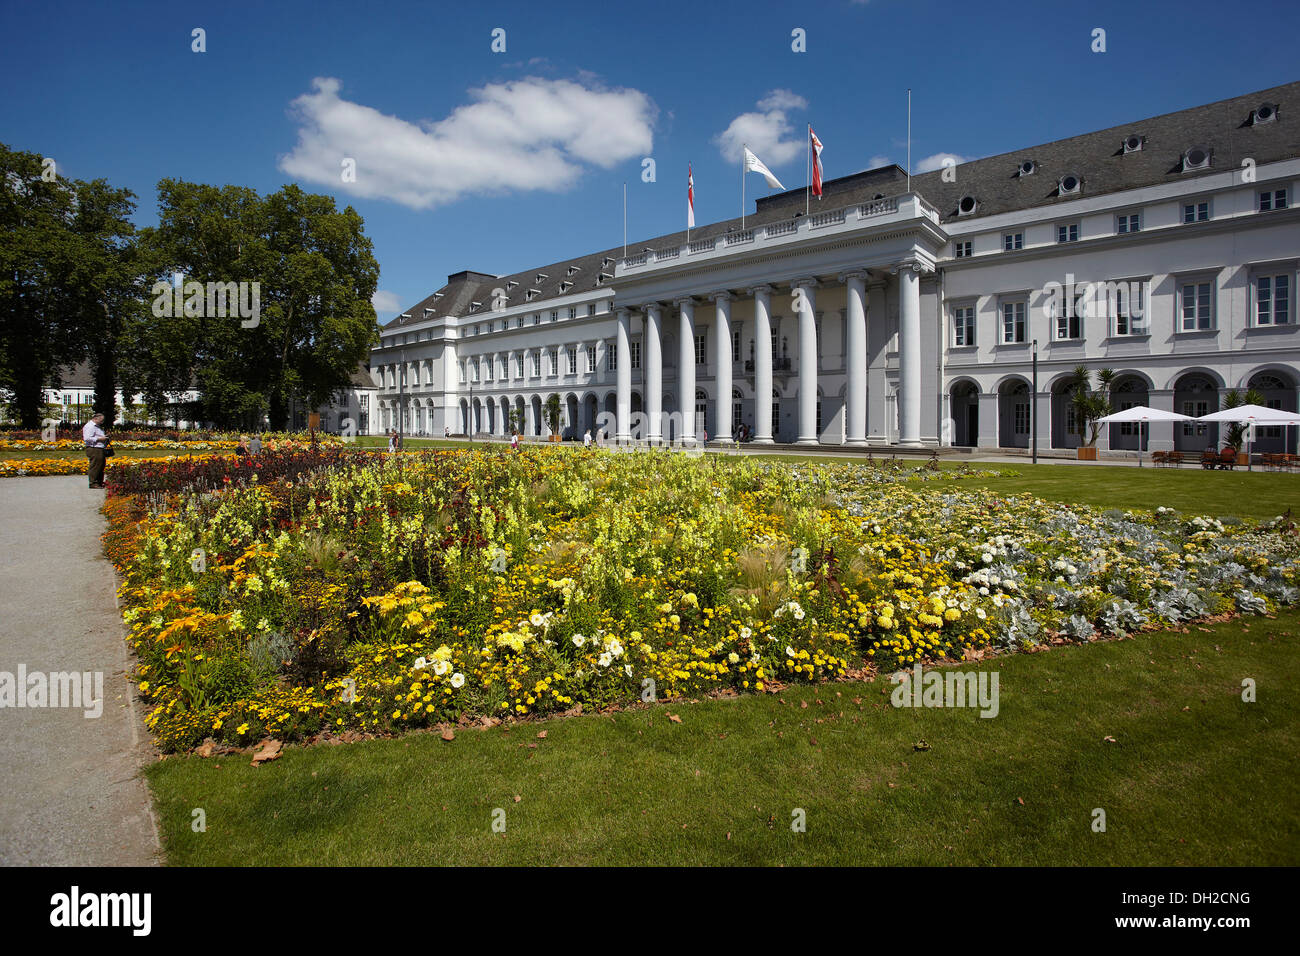 The Electoral Palace in Koblenz, Rhineland-Palatinate Stock Photo